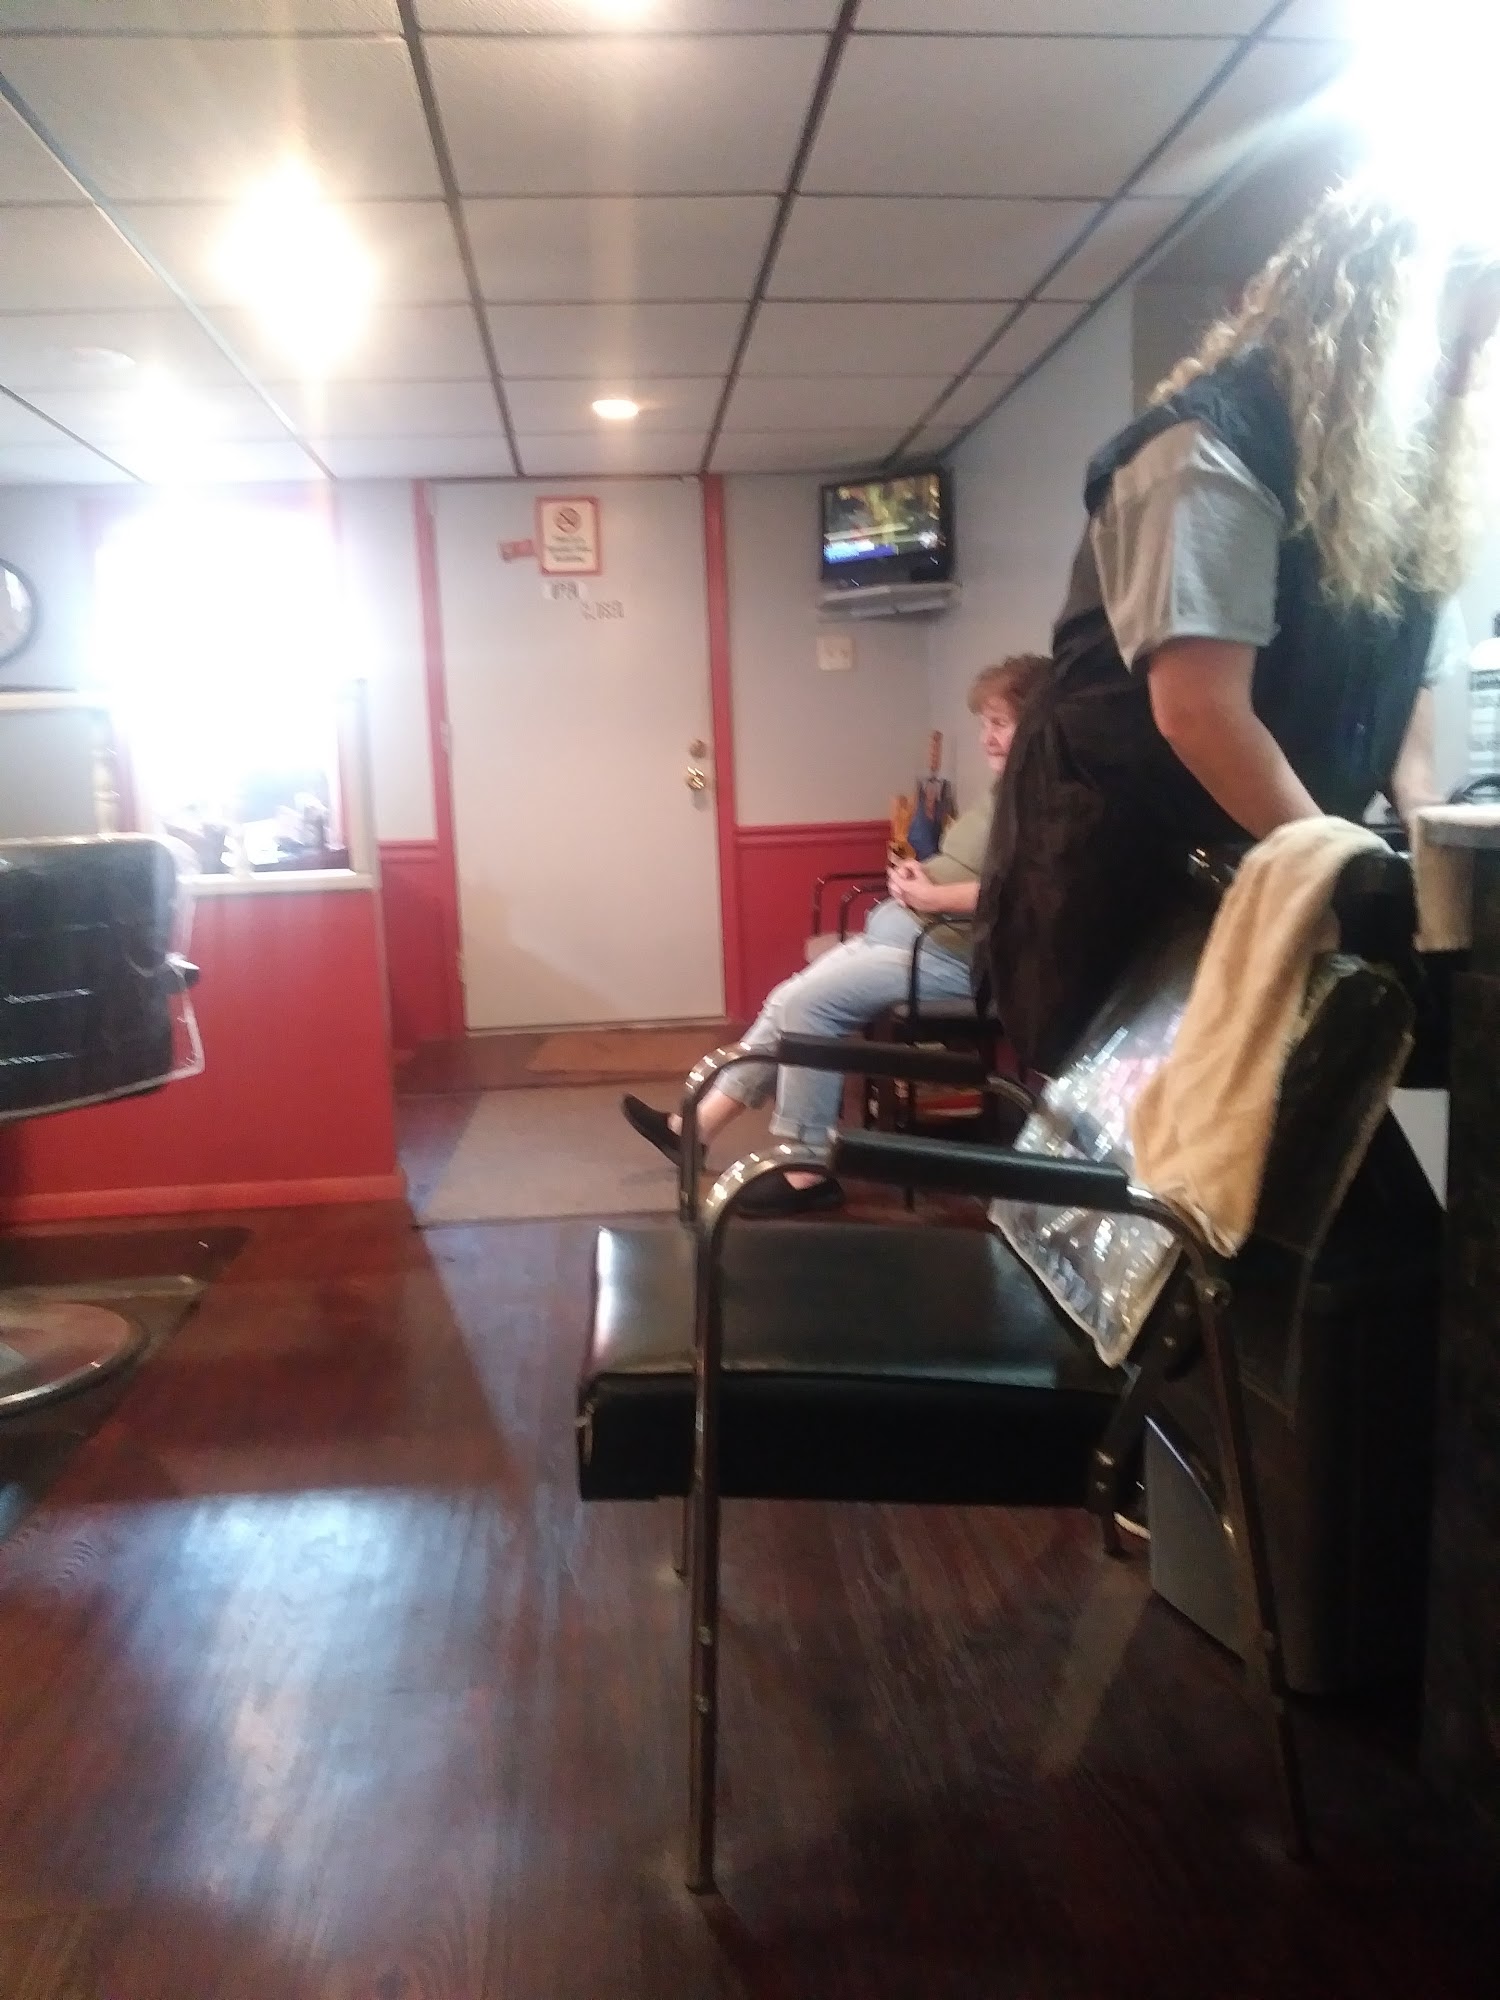 Carrie's Curls 1008 Lewis St, Brownsville Pennsylvania 15417